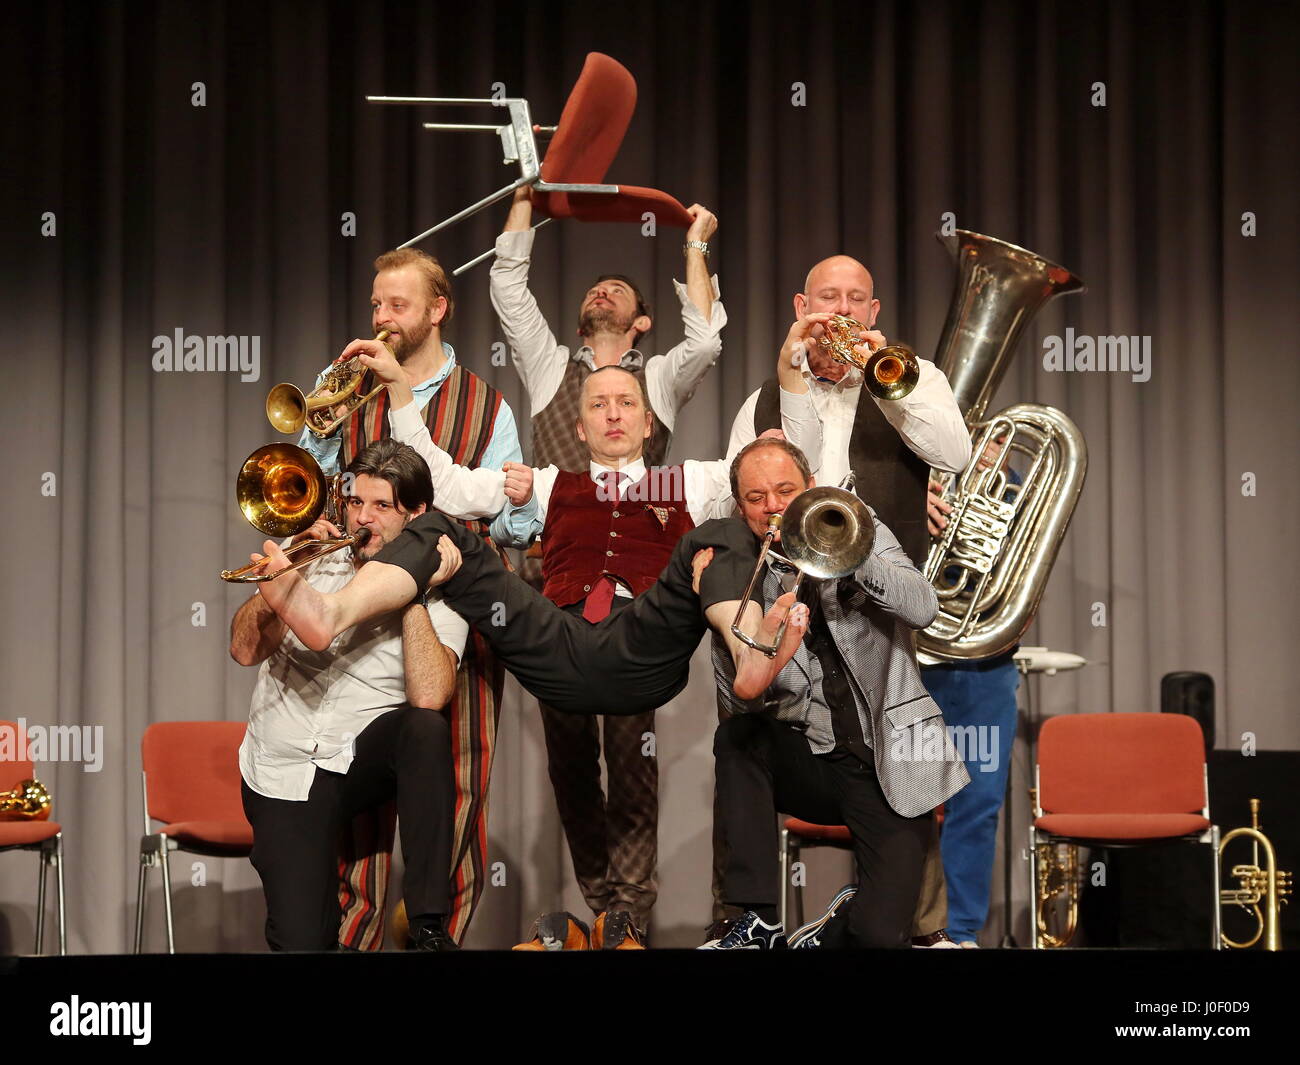 Mnozil Brass, Austrian brass septet, concert and music comedy program 'Yes, Yes, Yes', Kongresshalle Giessen/Germany, 20th January 2017 - in picture: Leonhard Paul (mid, on chair) plays with fingers and feeds the valves of the other musicians's trumpets and trombones. Fotocredit: Christian Lademann Stock Photo